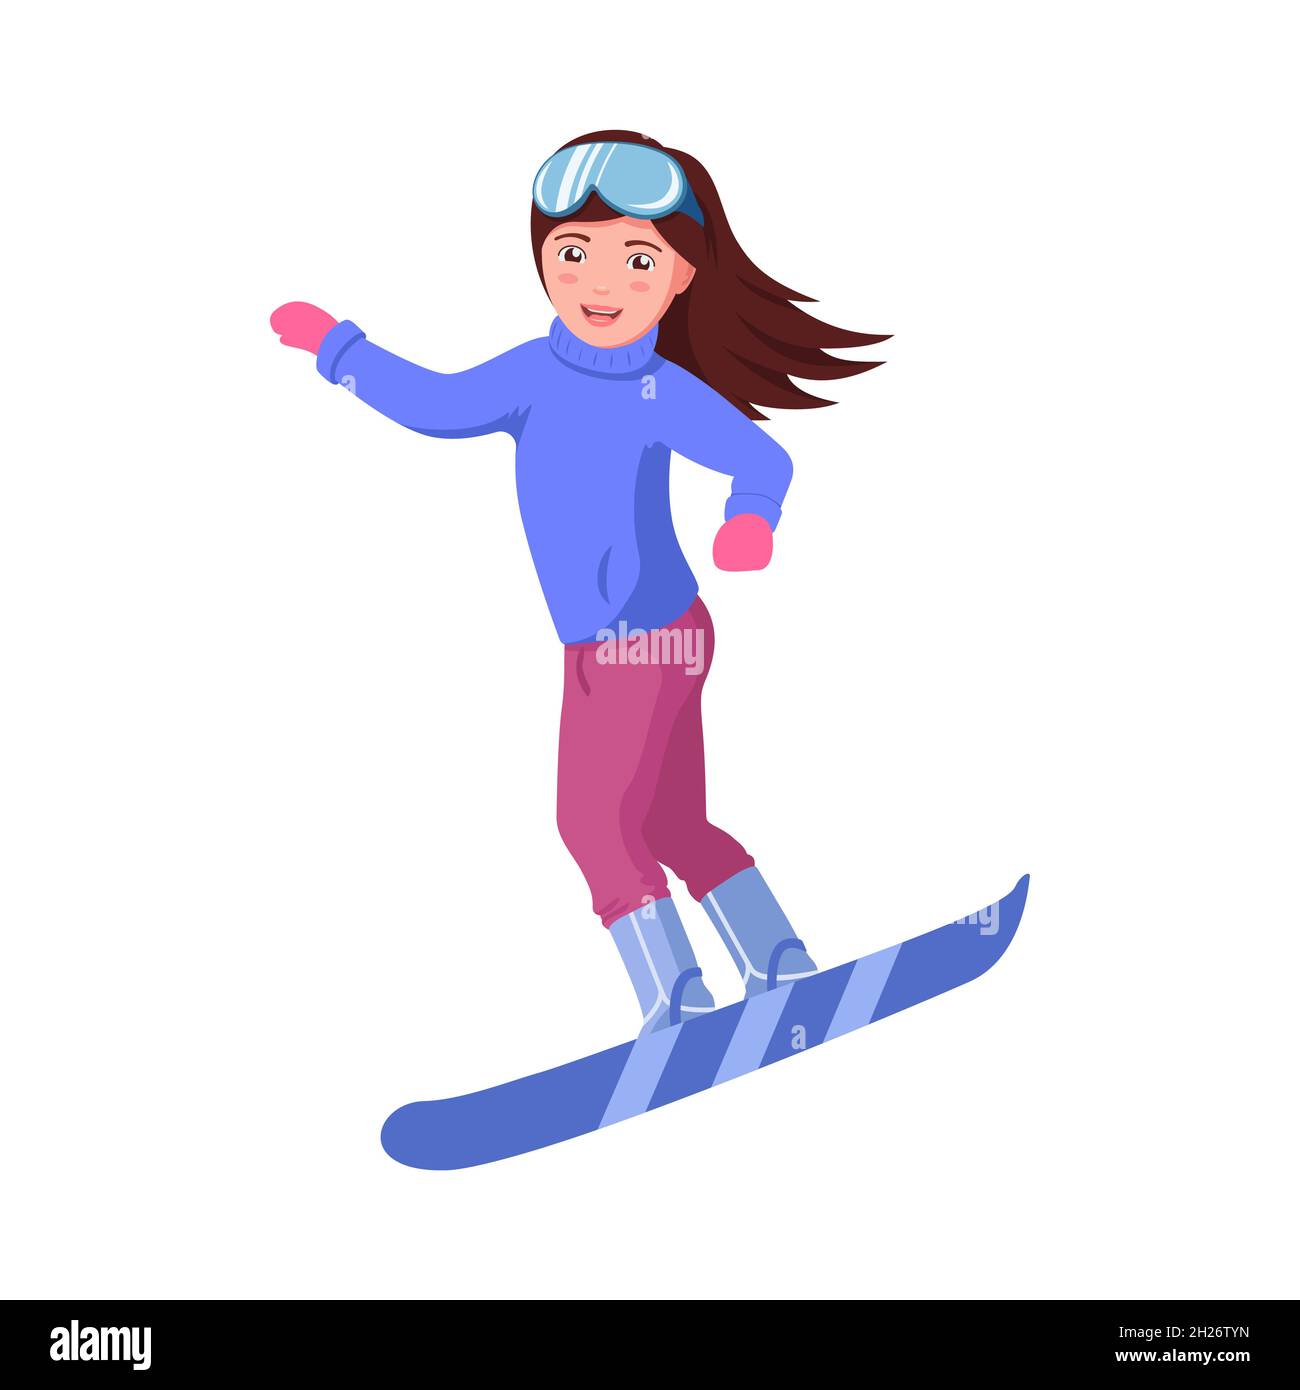 Girl is snowboarding. Vector illustration of a beautiful young woman engaged in a winter sport, girl snowboarder. Stock Vector